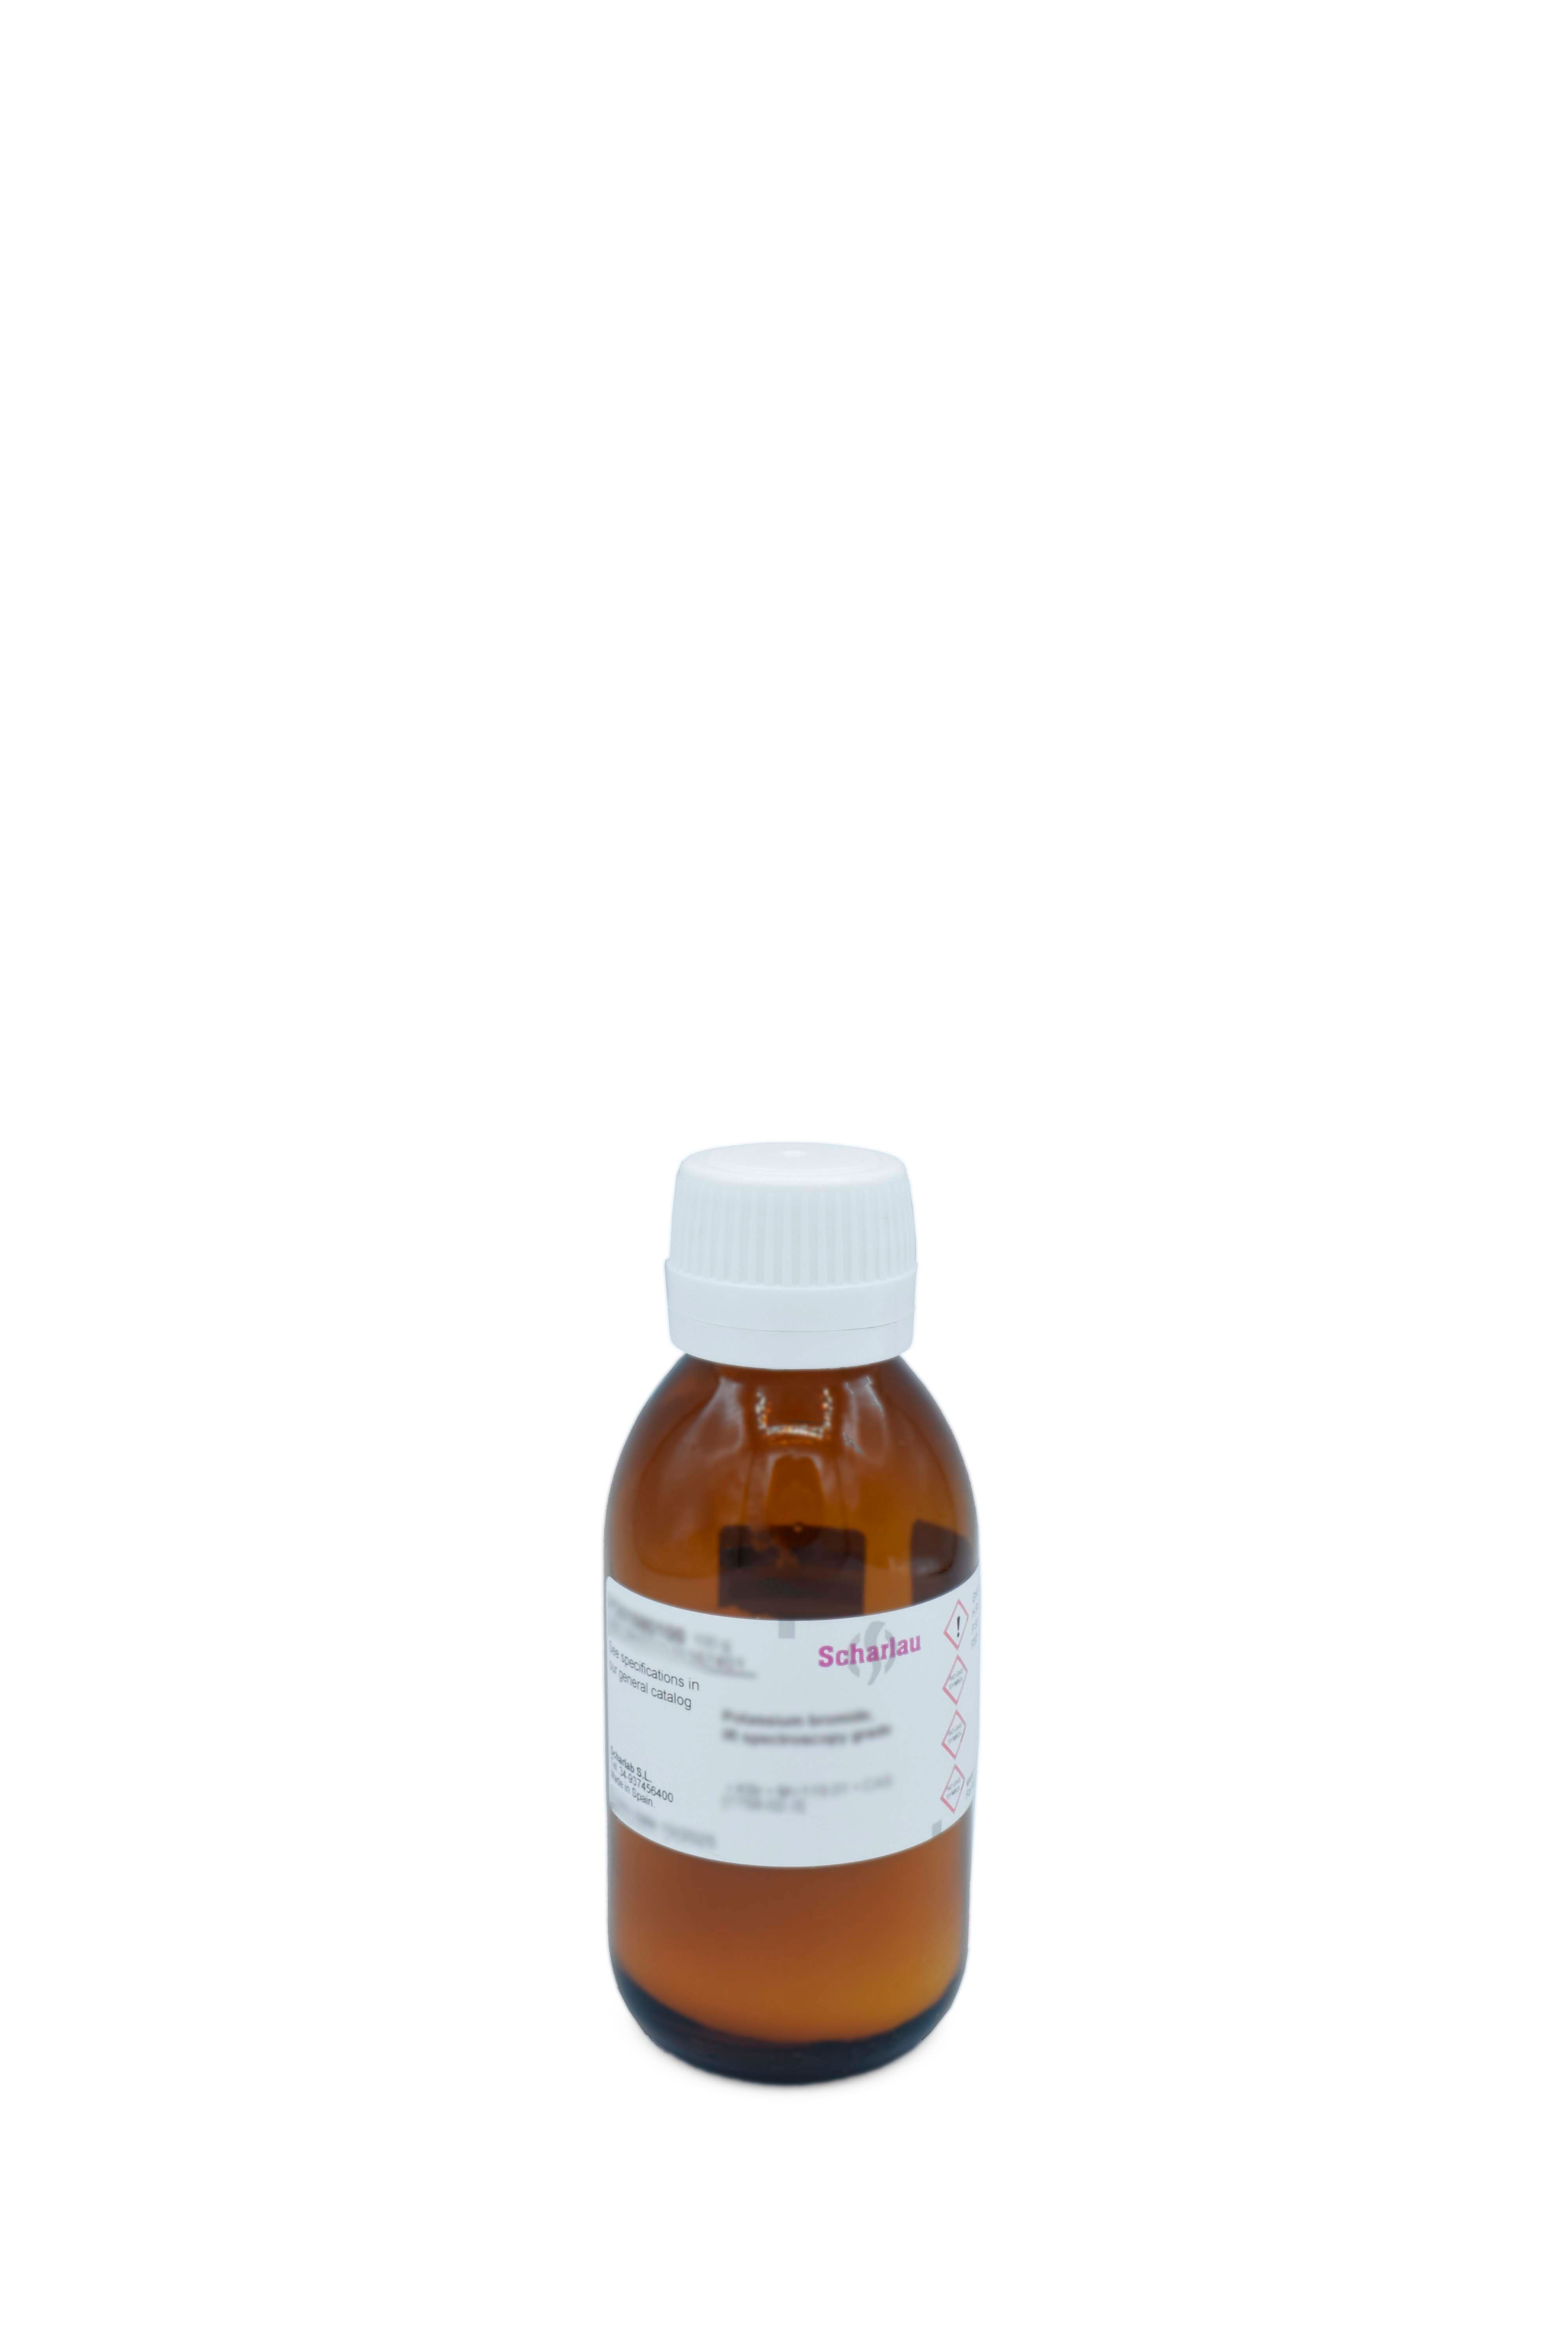 Orcein, solution A, for microscopy, Natural red 28